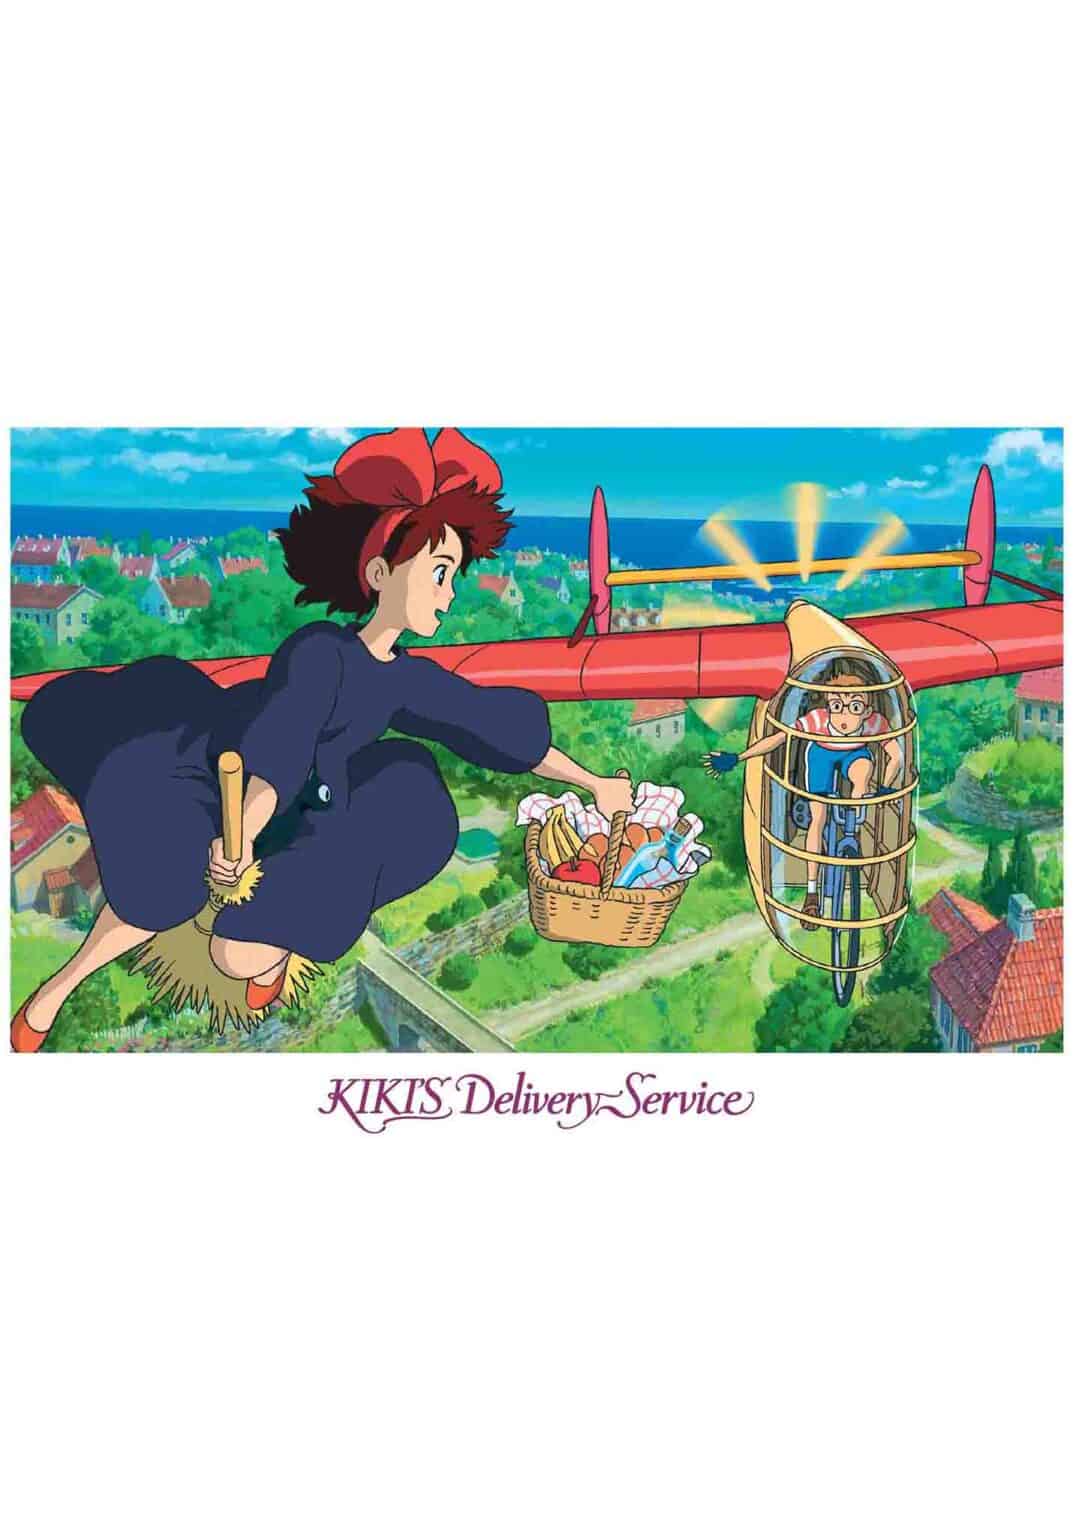 Clever Idiots Studio Ghibli Post Cards: Howl's Moving Castle, Totoro, Spirited Away, Kiki Kiki's Delivery Service Kawaii Gifts 4961524647644